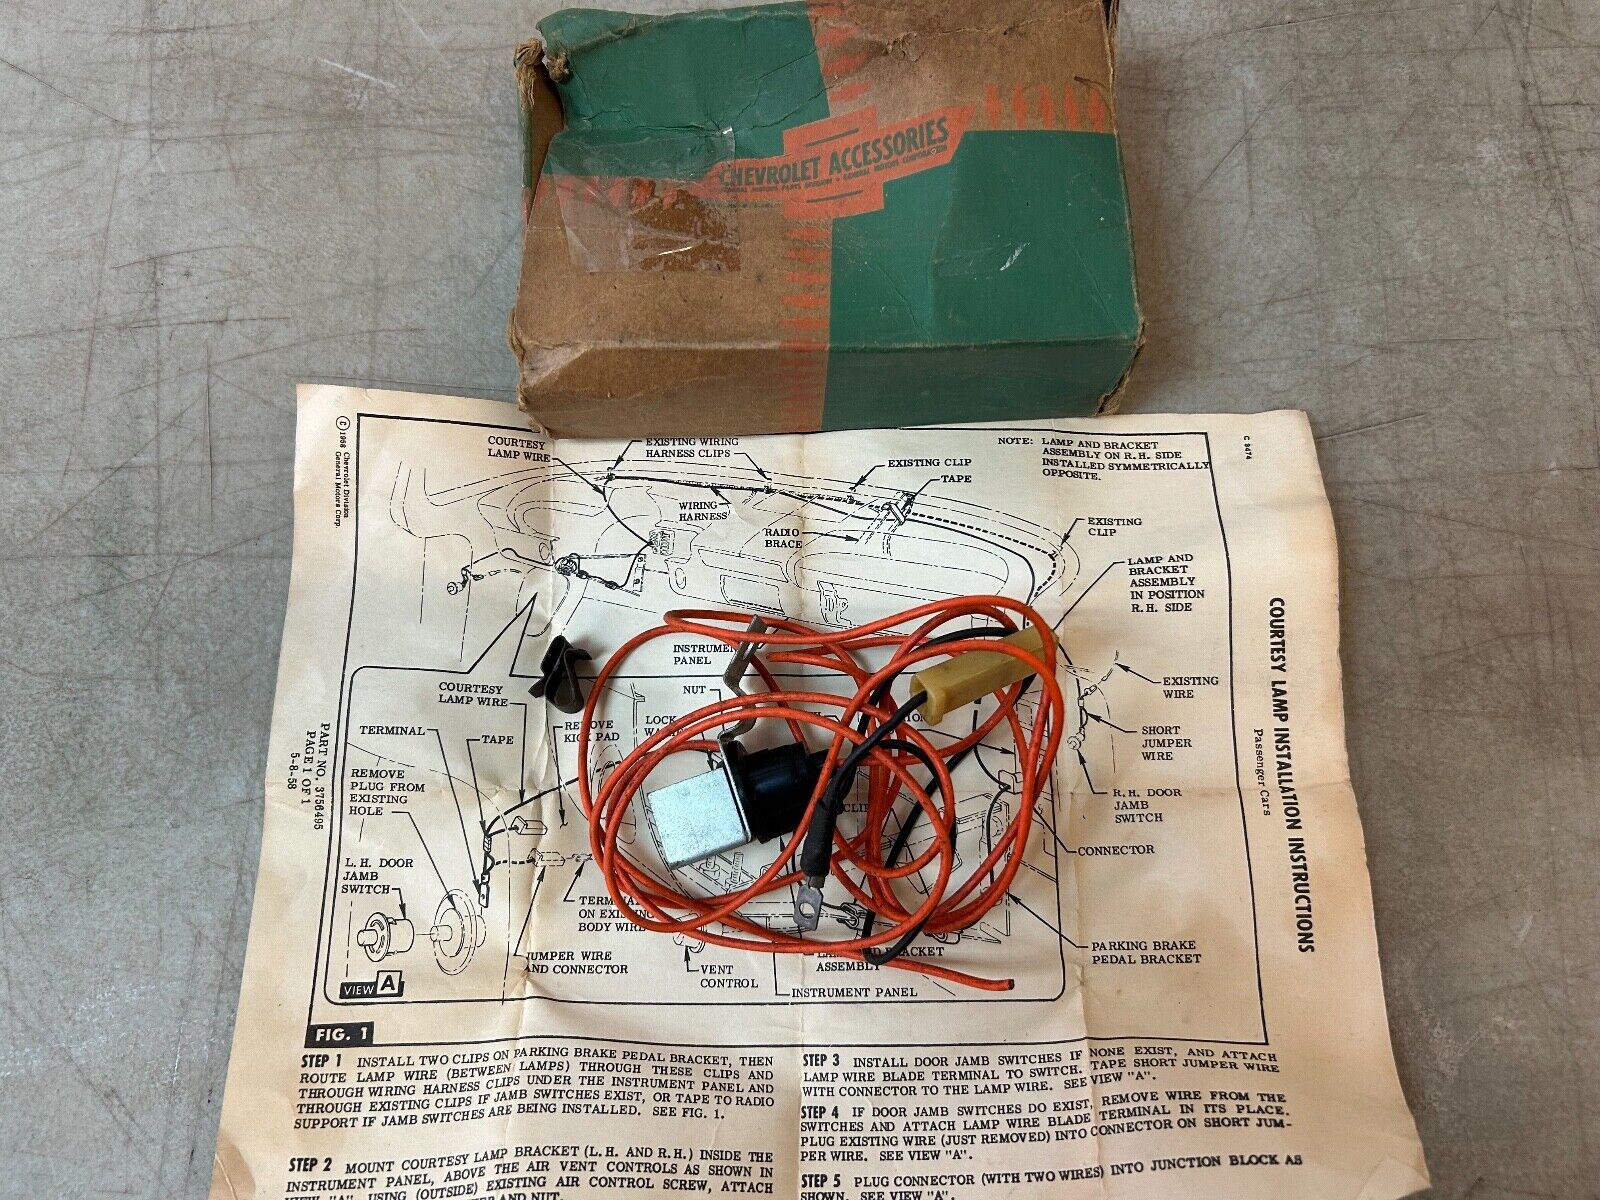 Chevrolet Courtesy Light kit. Under dash lamp housing with wiring and directions